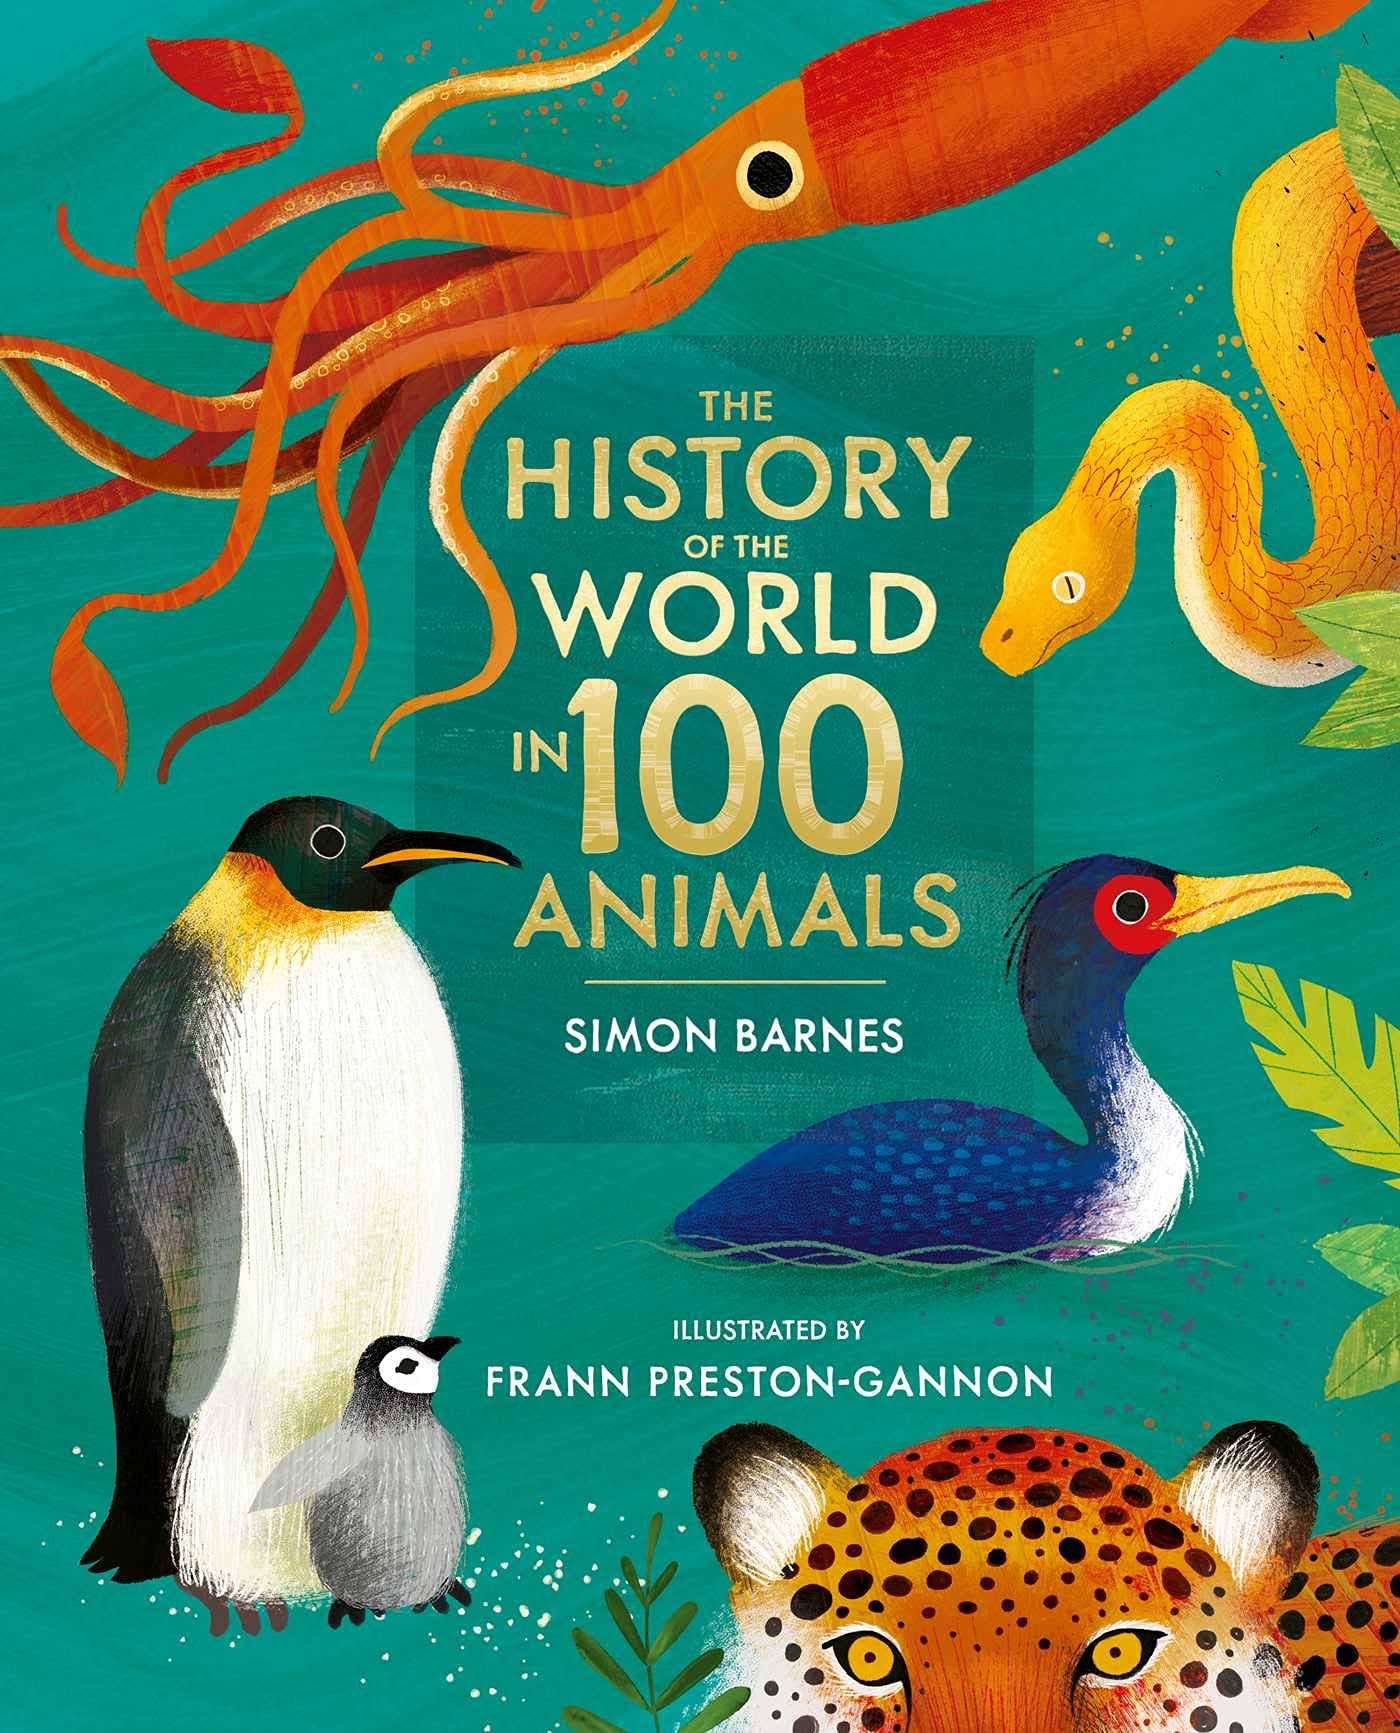 The History of The World in 100 Animals - Illustrated Edition by Simon Barnes